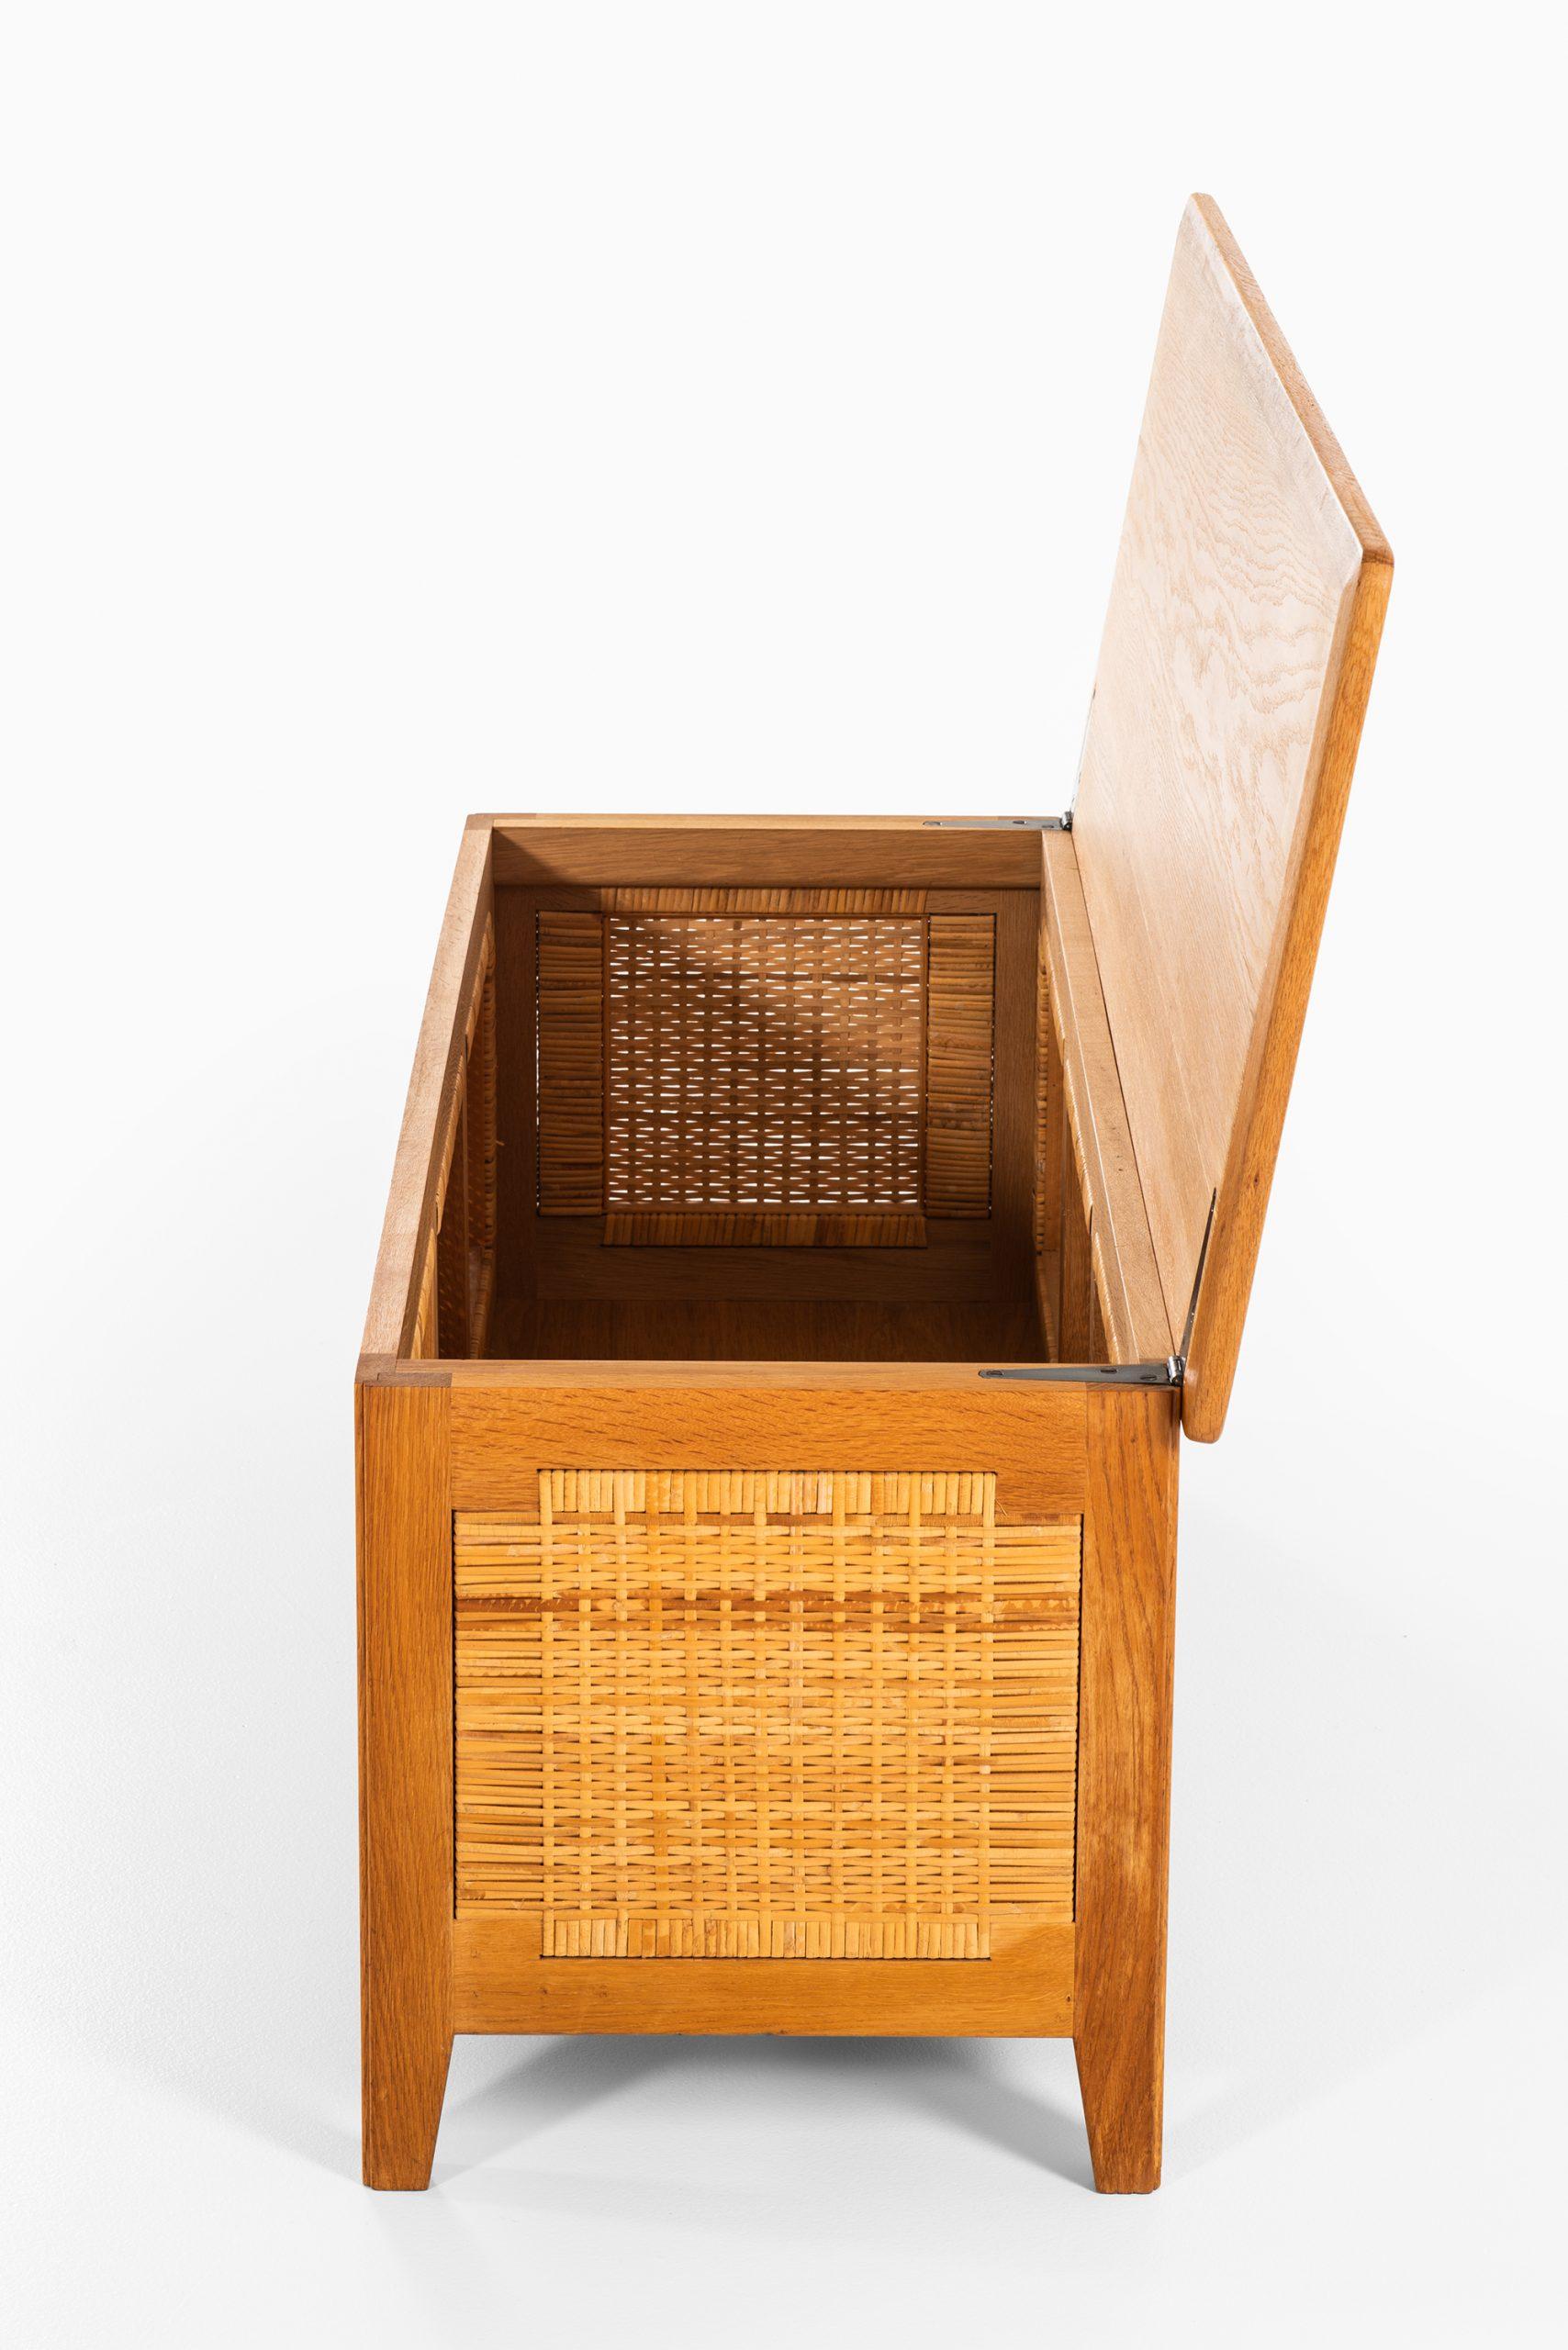 Danish Kai Winding Chest / Bench Produced by Poul Hundevad in Denmark For Sale